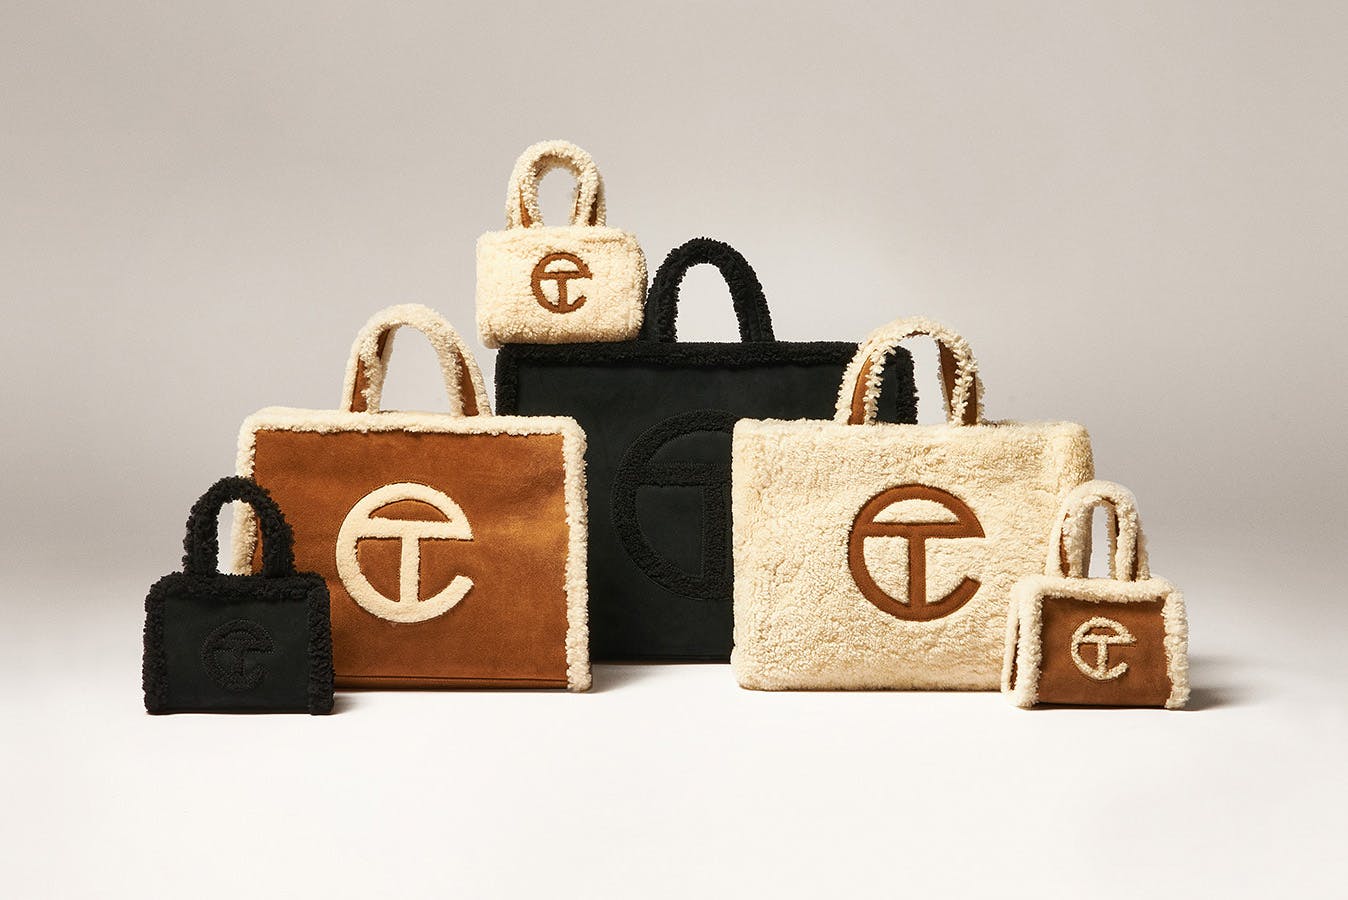 Telfar x UGG: All you Need to Know About the Collab